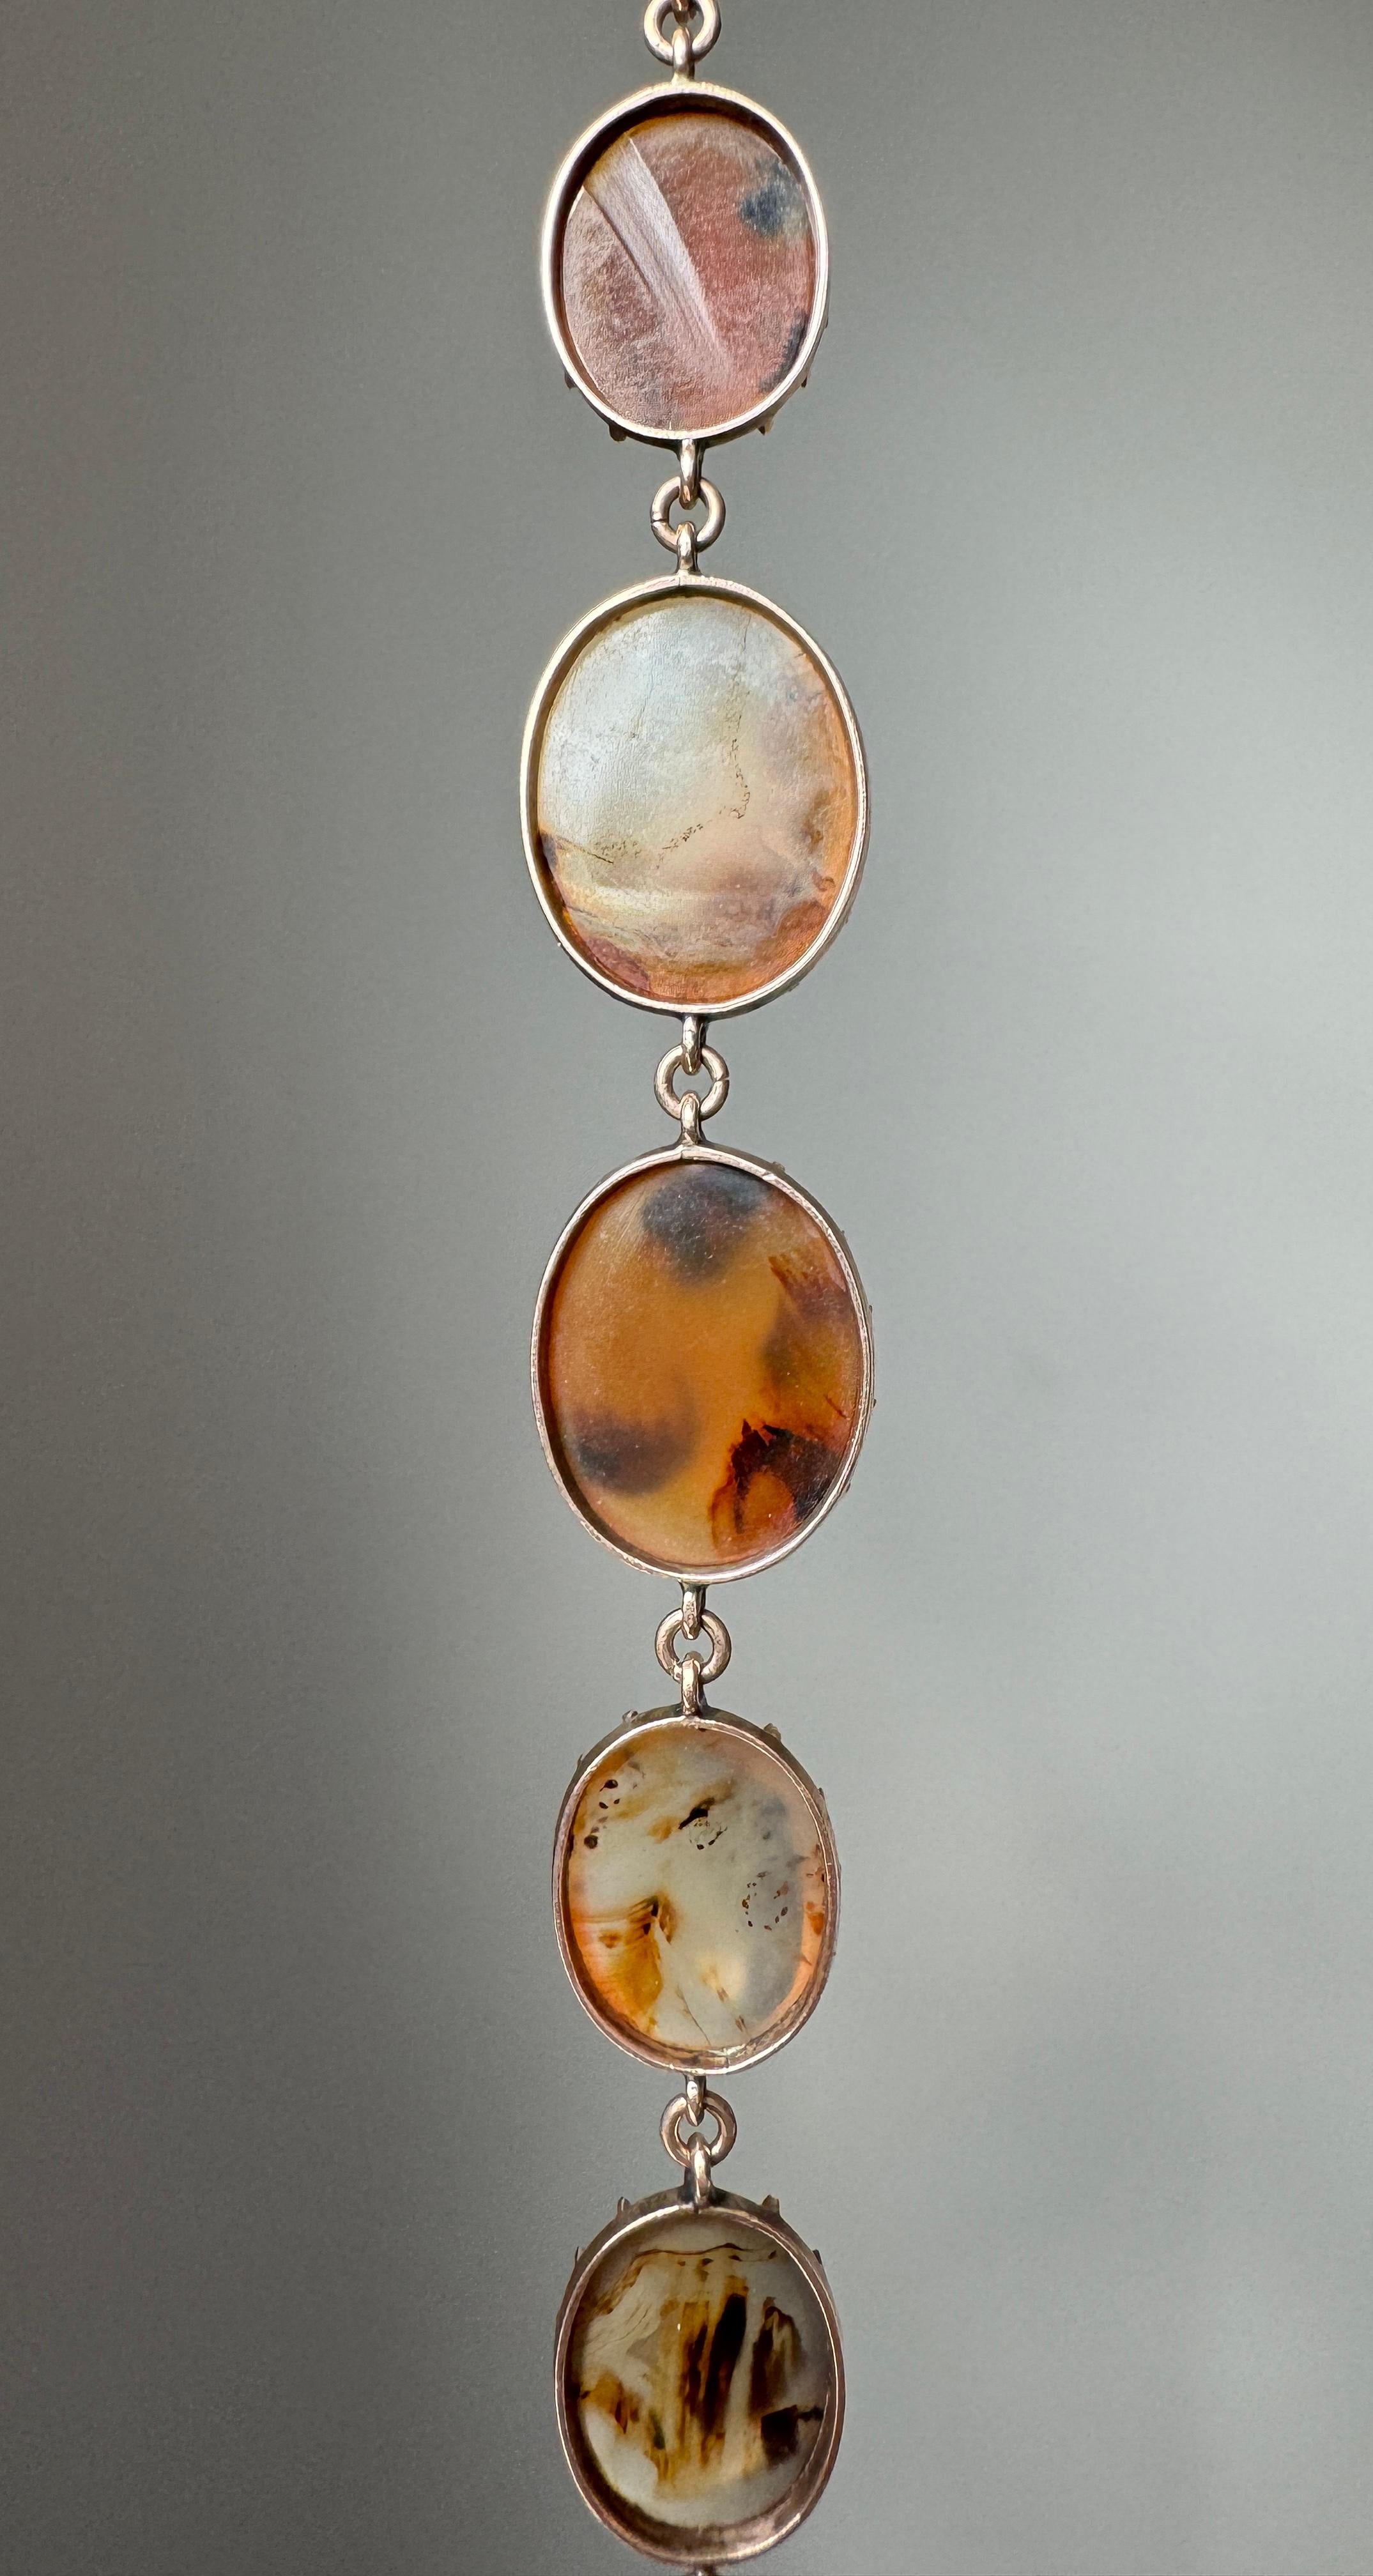 Dating to the early nineteenth century, this Georgian demi-parure gracefully endured the passage of time together. Composed of graduated translucent agate panels mounted in crimped 15 karat rose settings, each terminates in a concealed clasp. A